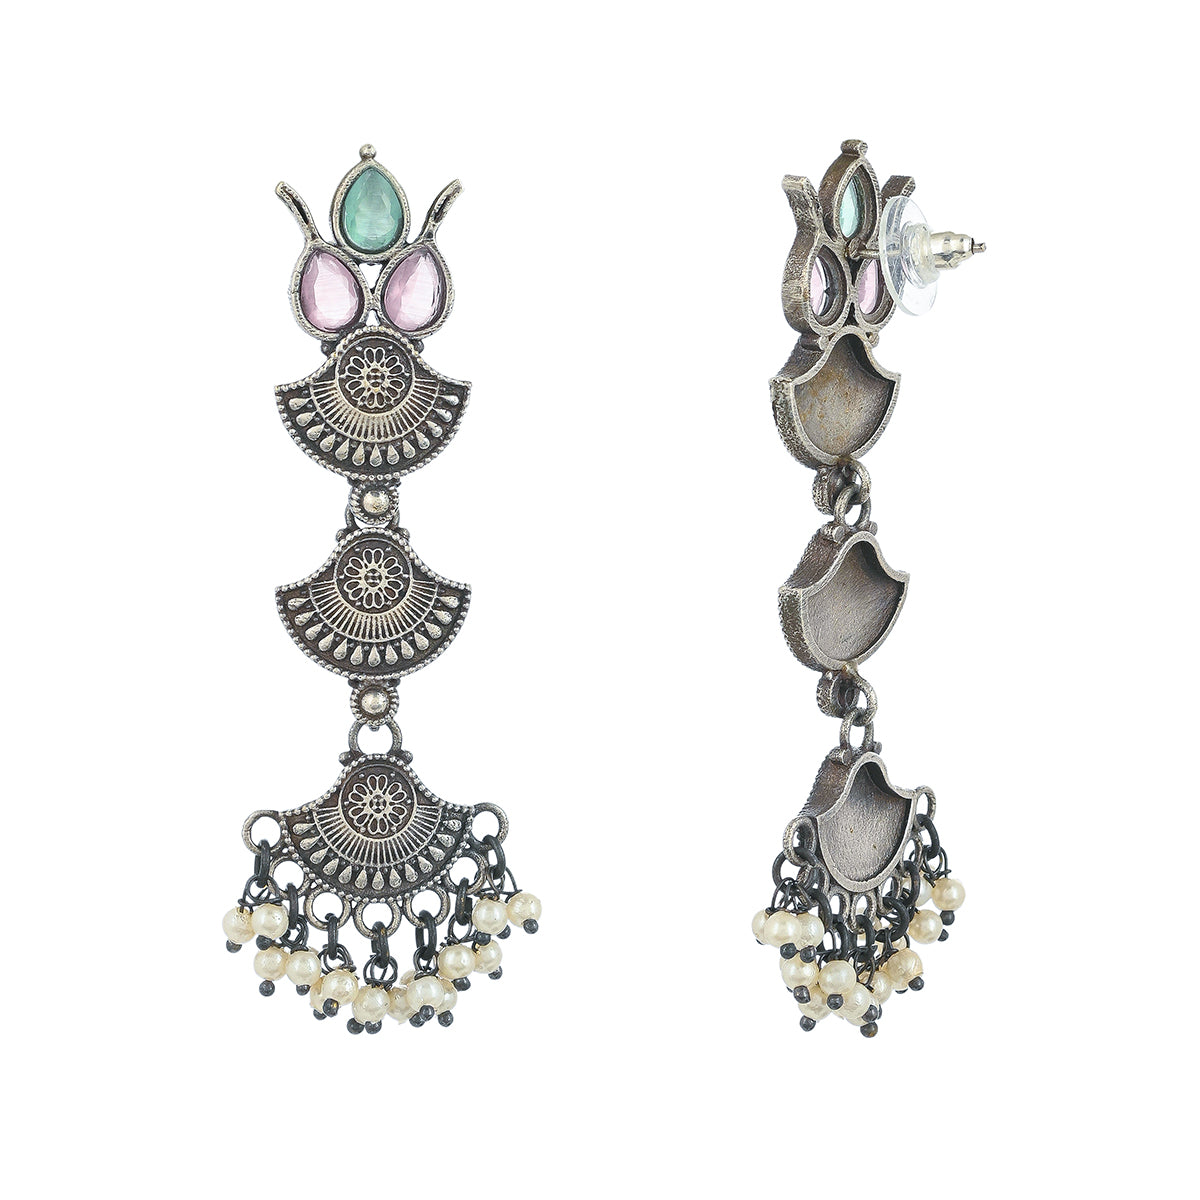 Antique Elegance Faux Pearls and Kundan Adorned Silver Plated Brass Layered Drop Earrings